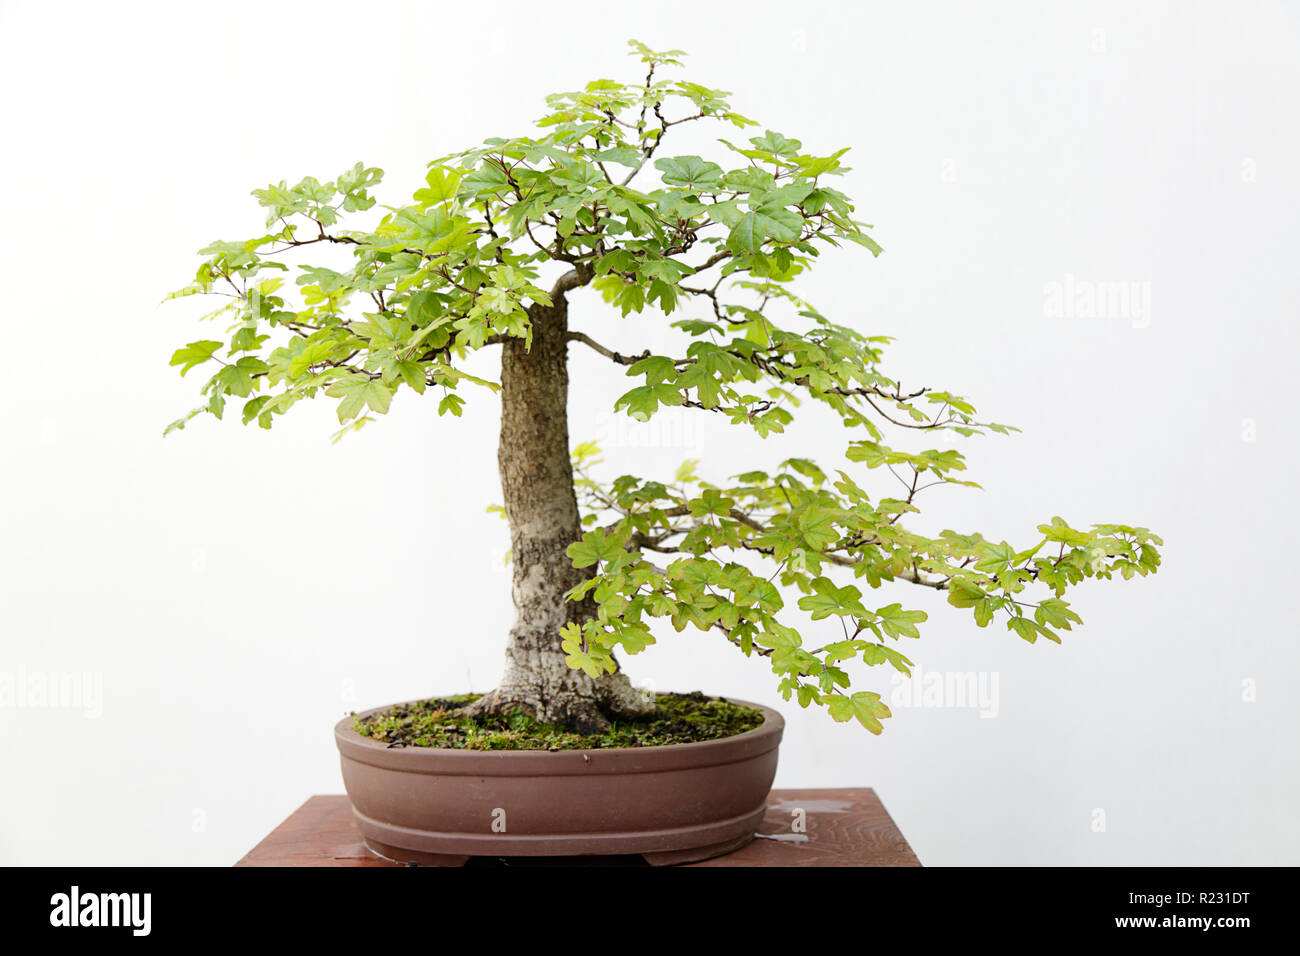 Acer campestre bonsai on a wooden table and white background Stock Photo